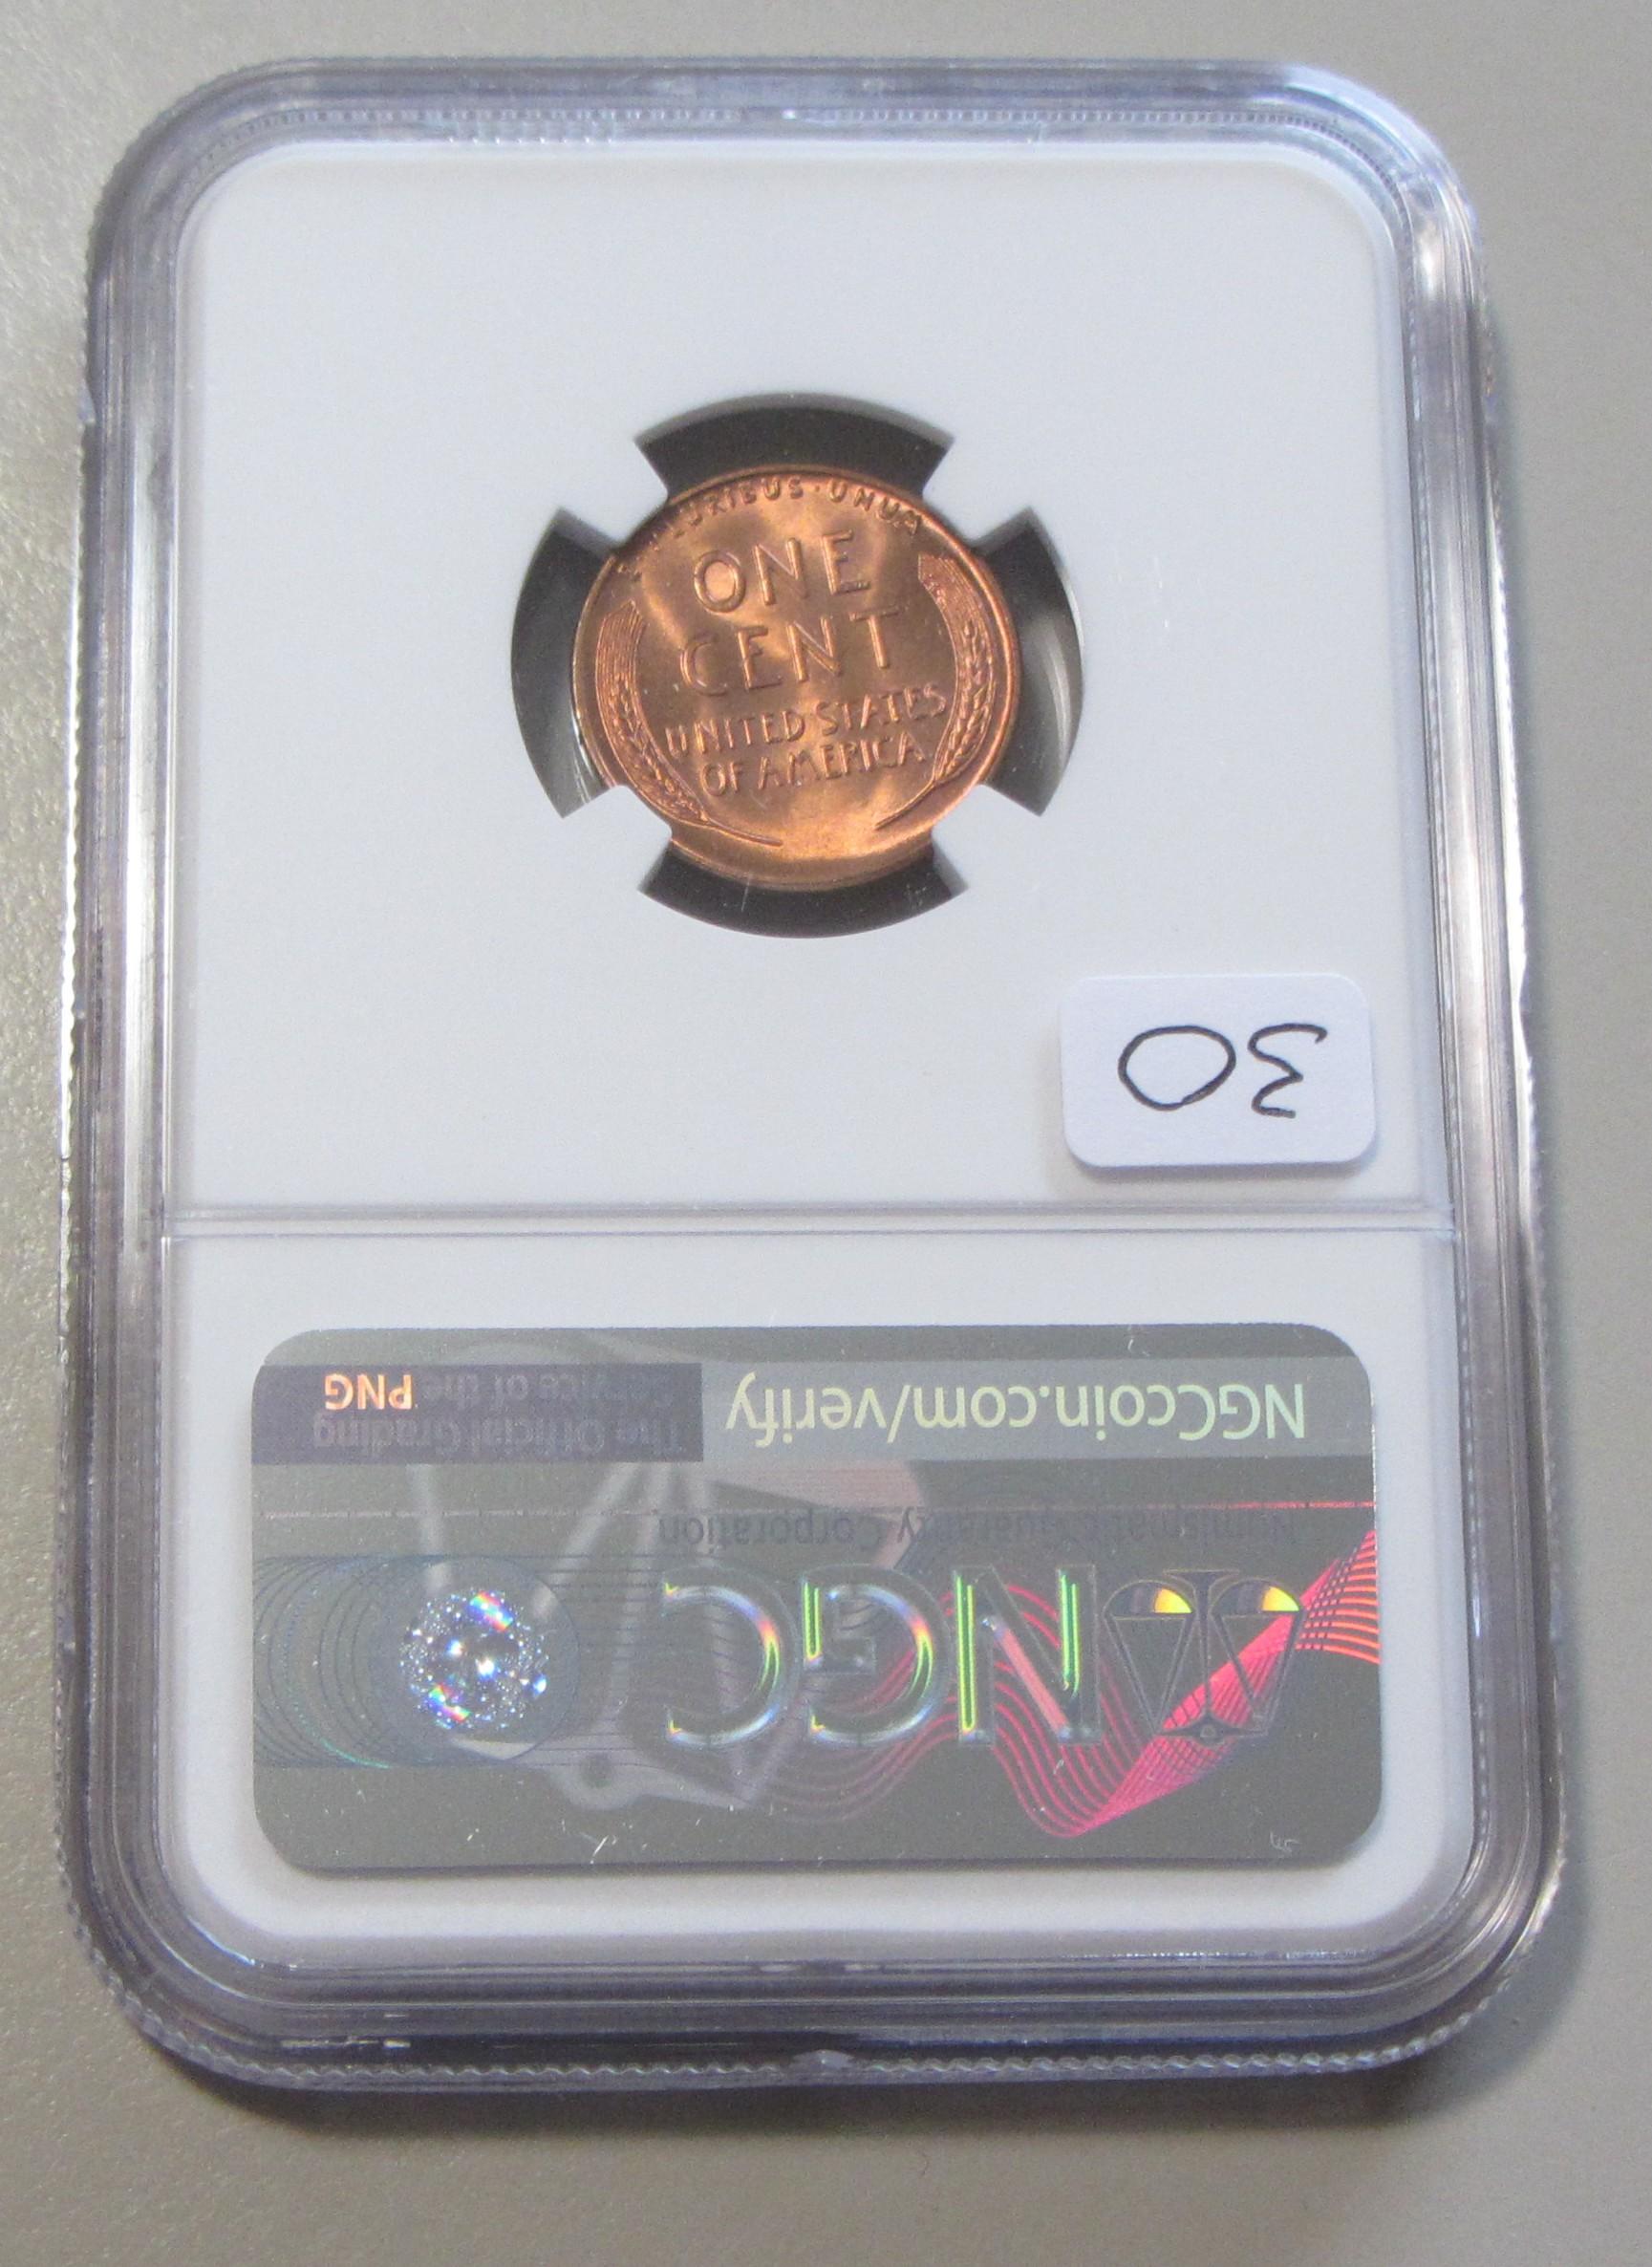 1941 WHEAT CENT RED NGC MS 66